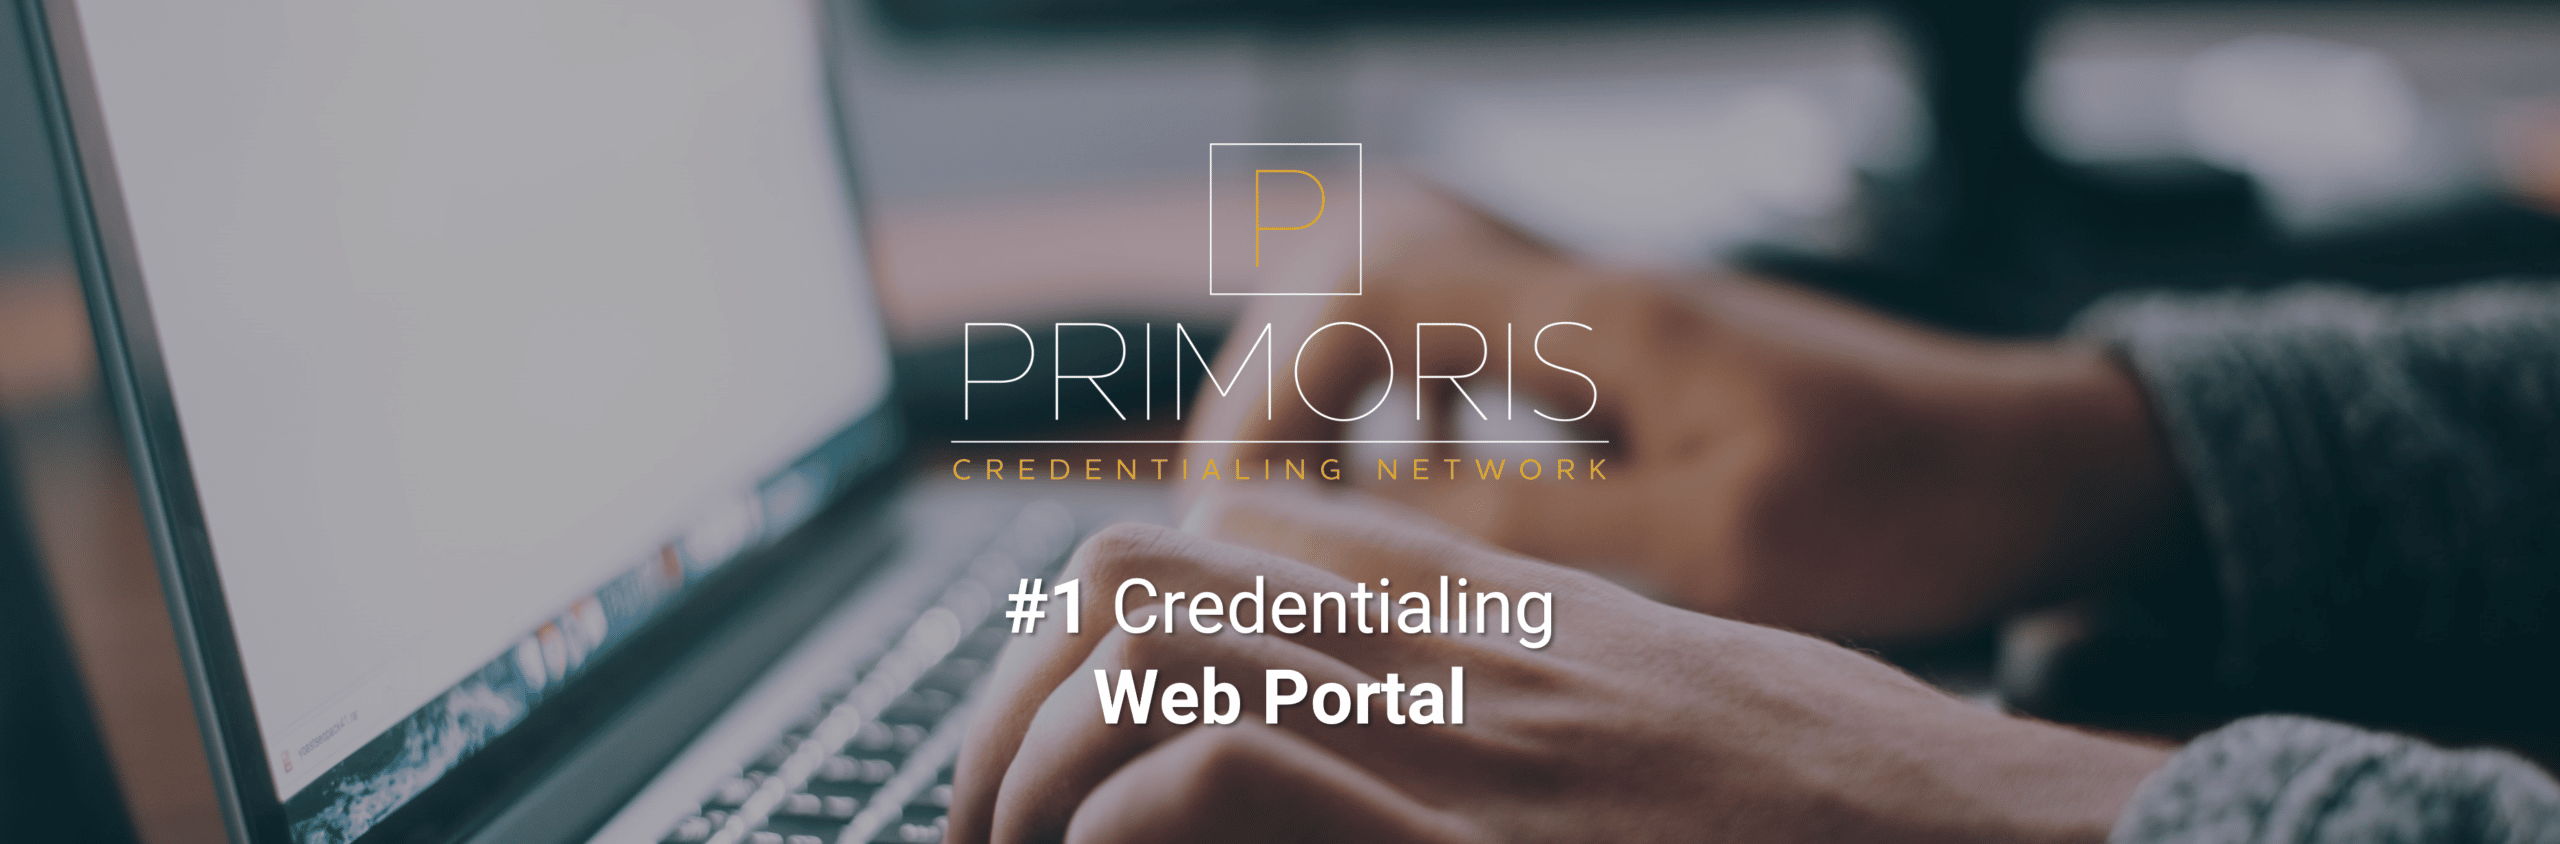 Fifth Avenue Healthcare Has The #1 Credentialing Web Portal For Our Credentialing Clients.